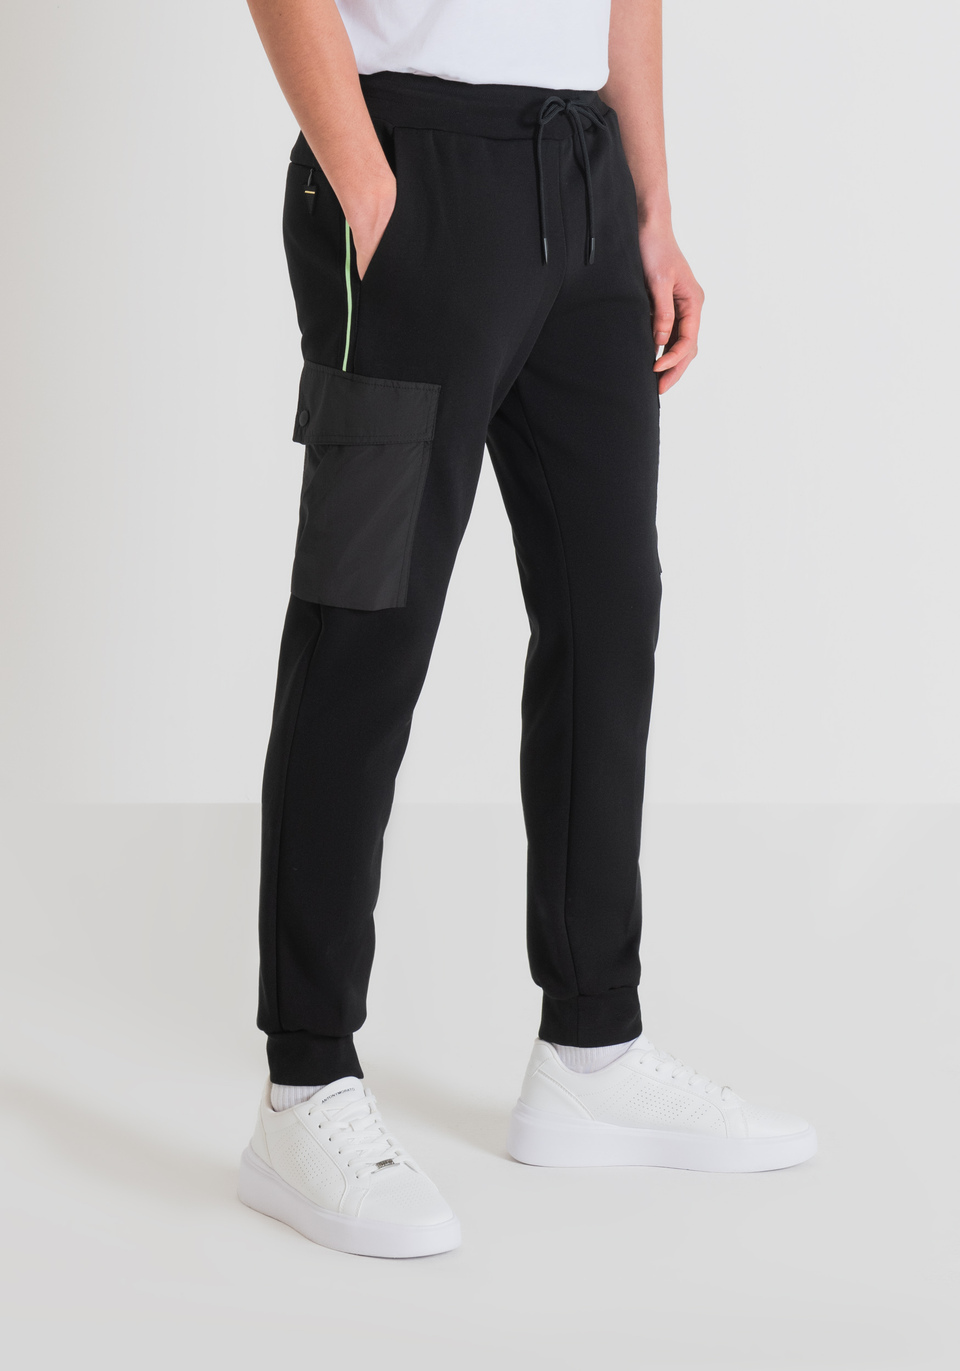 REGULAR FIT SWEATPANTS IN COTTON BLEND FABRIC WITH TECHNICAL